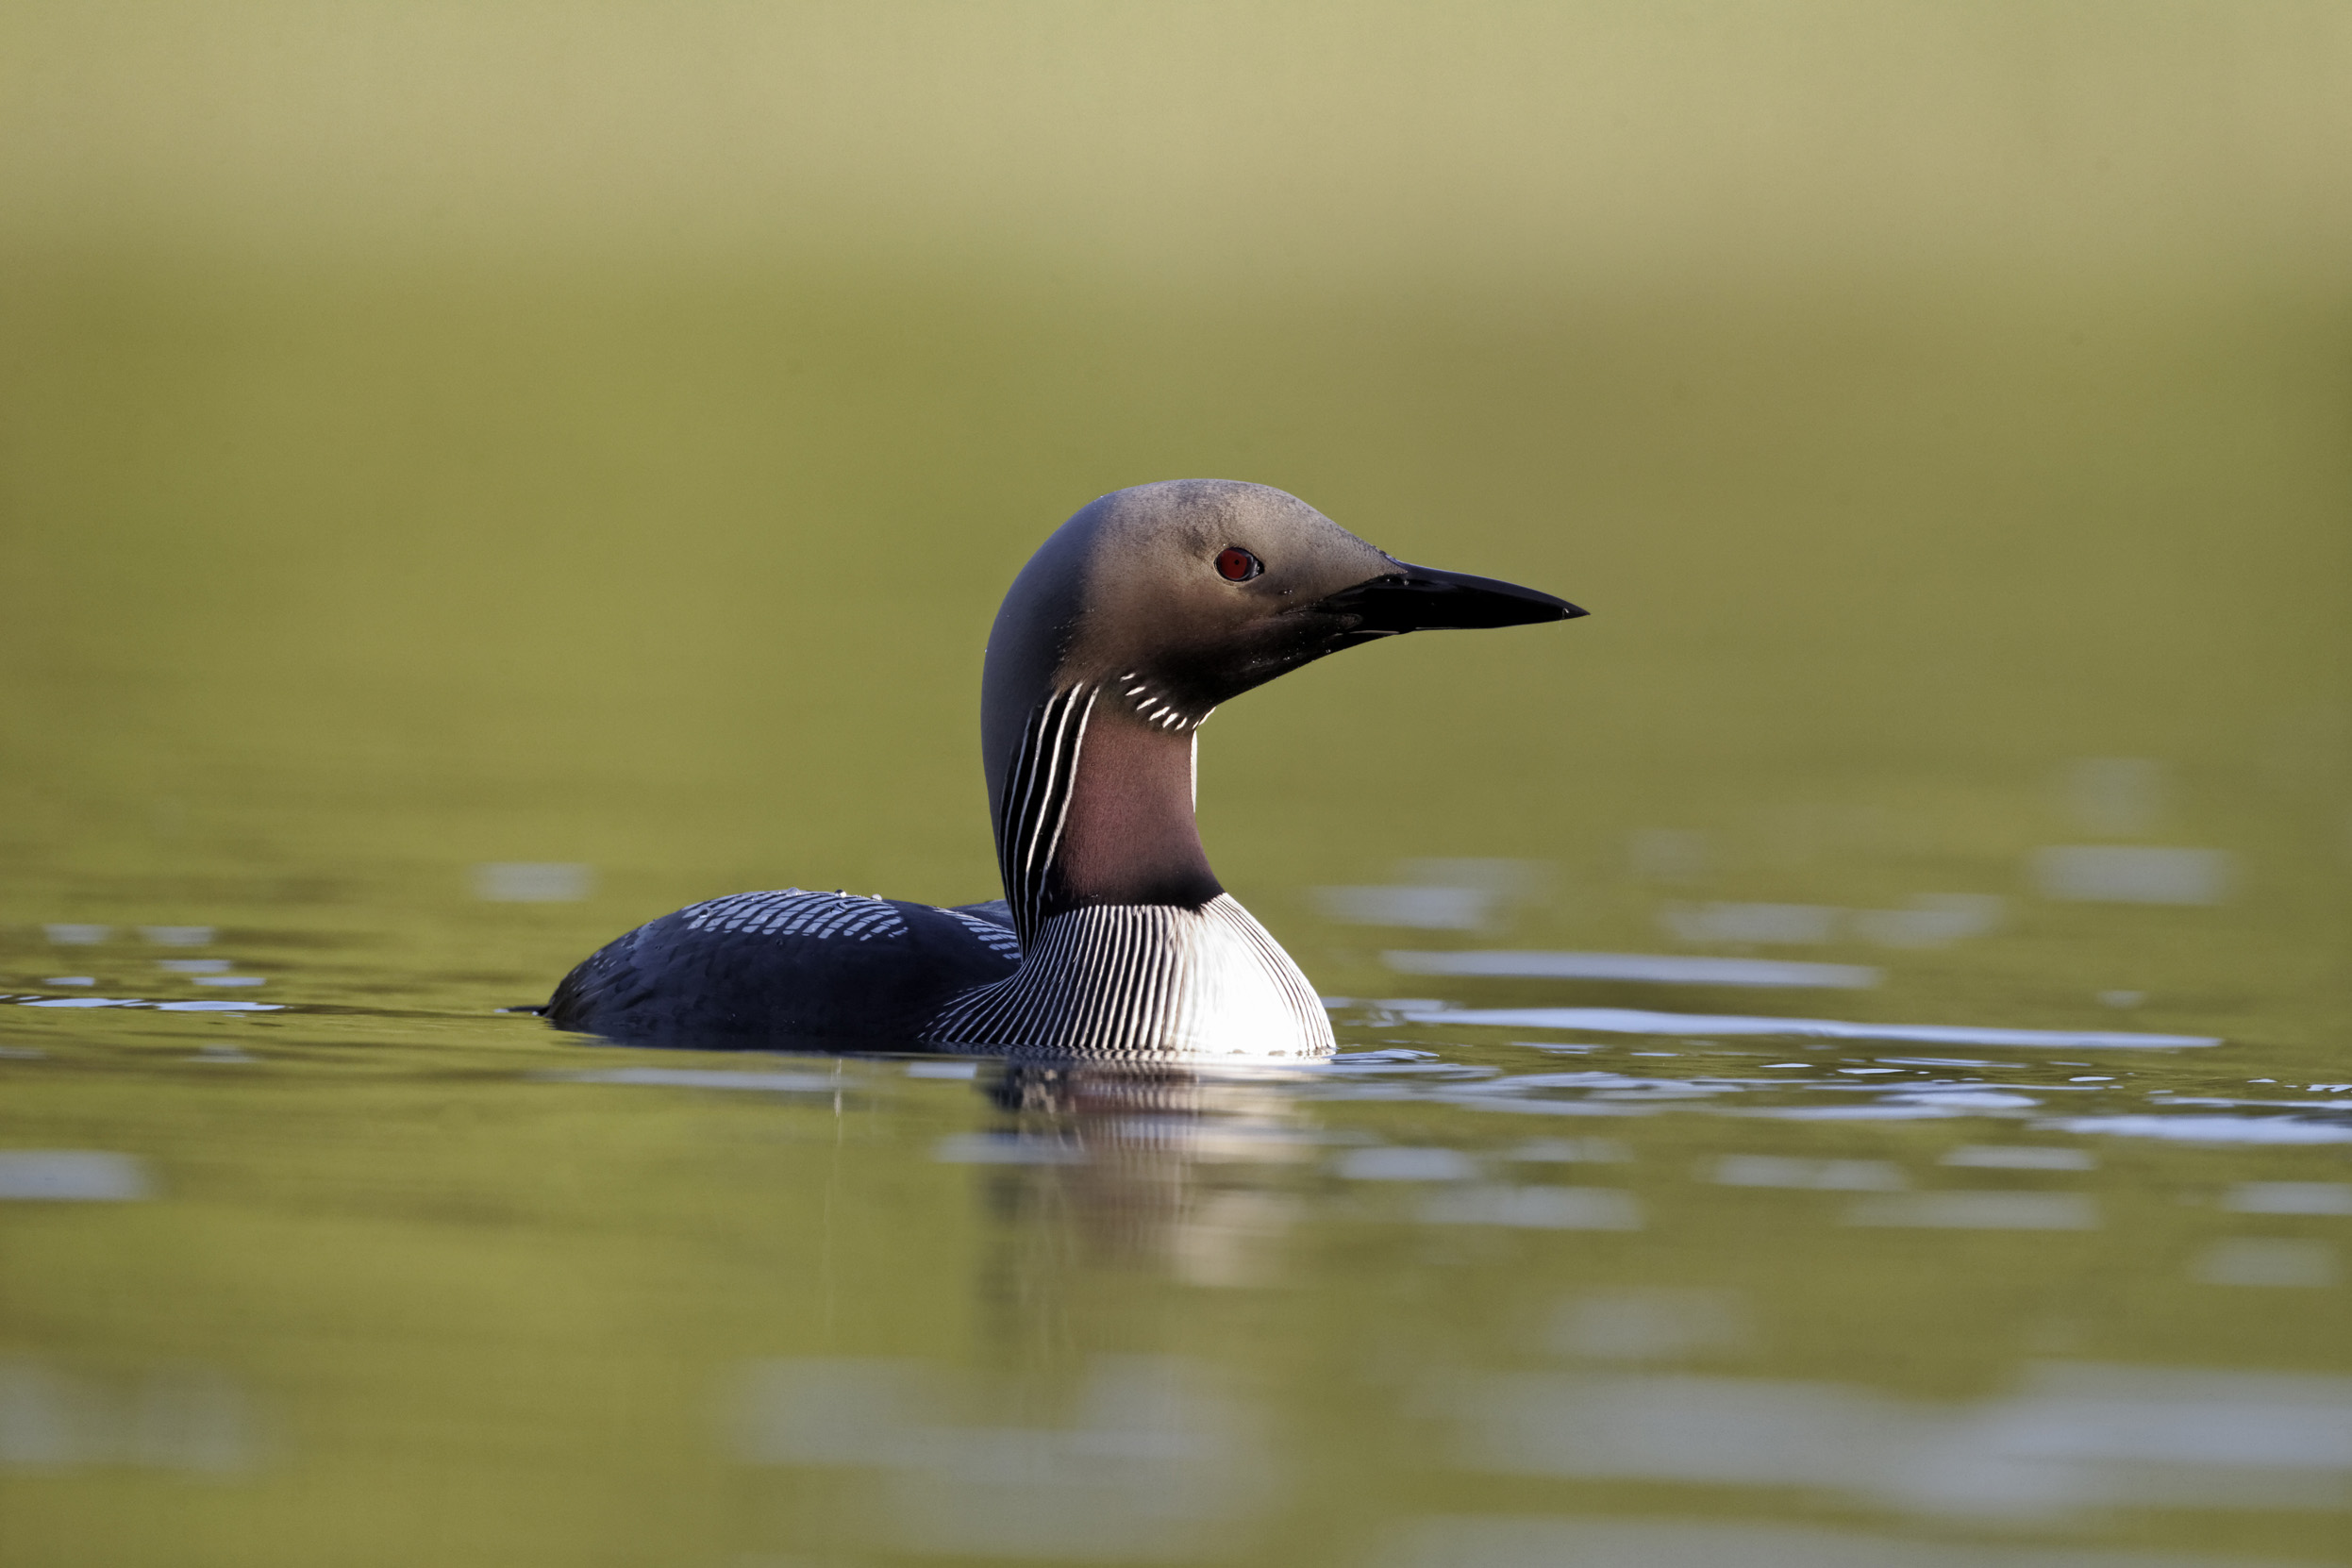 Black-throated Diver submerged in water.